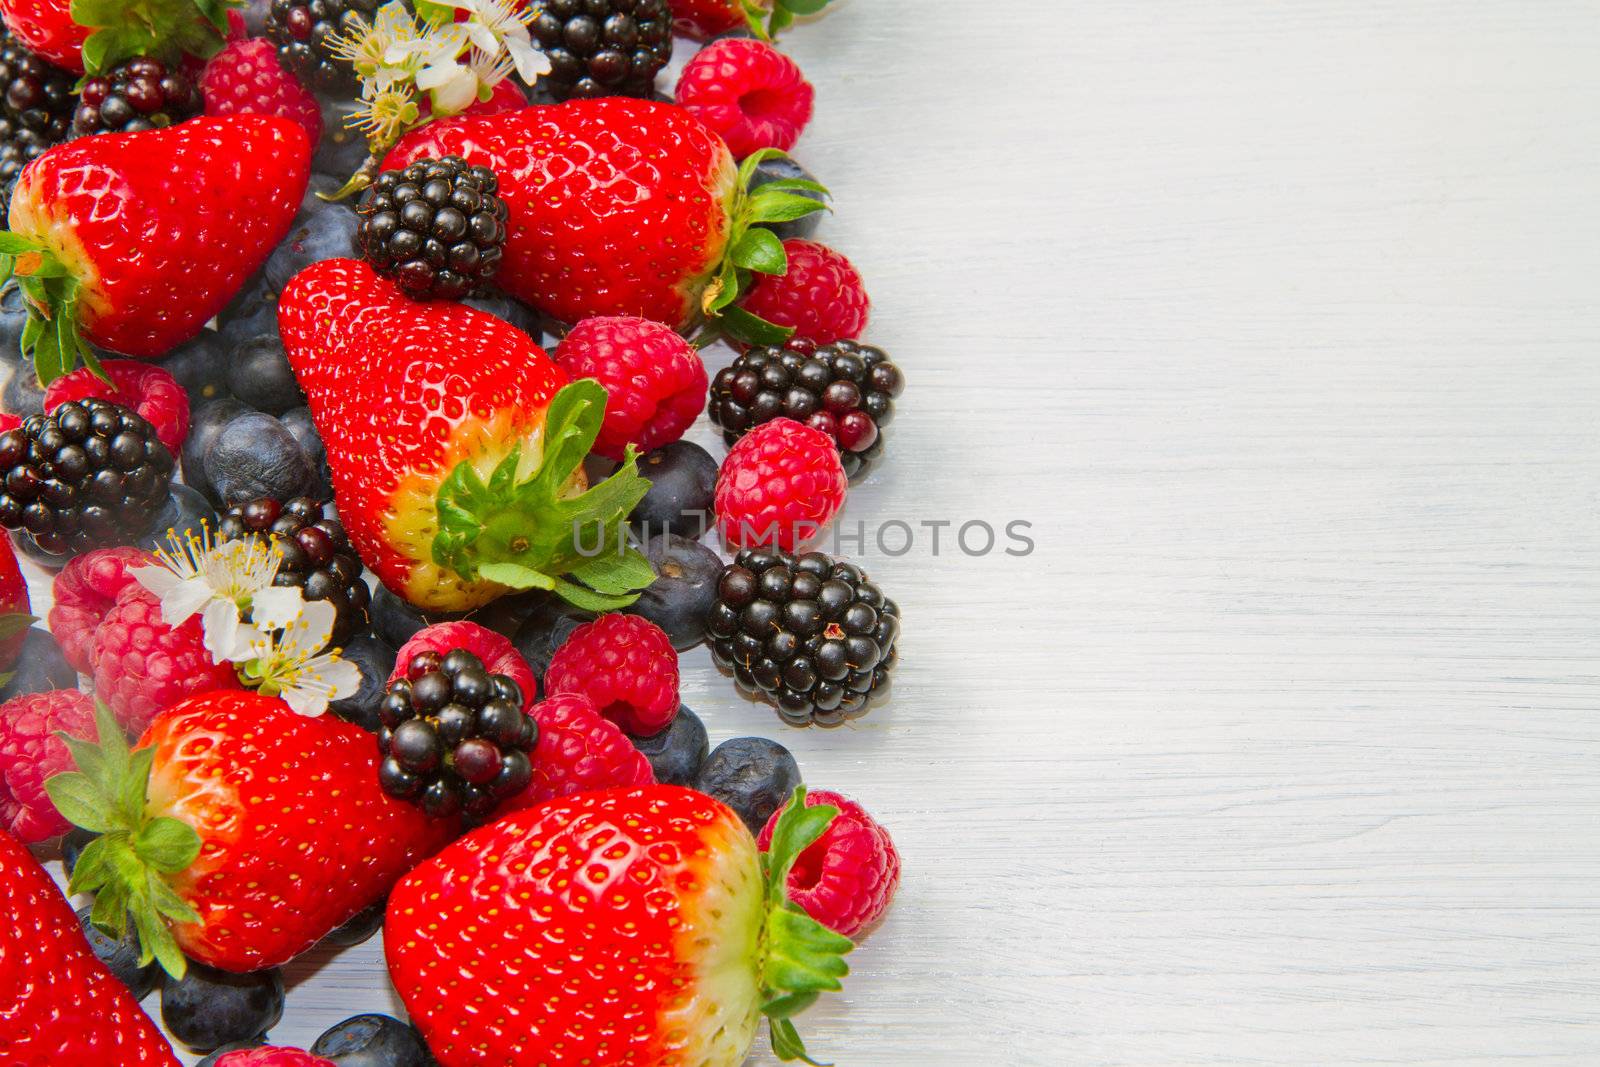 Berries on white Wooden Background by lsantilli